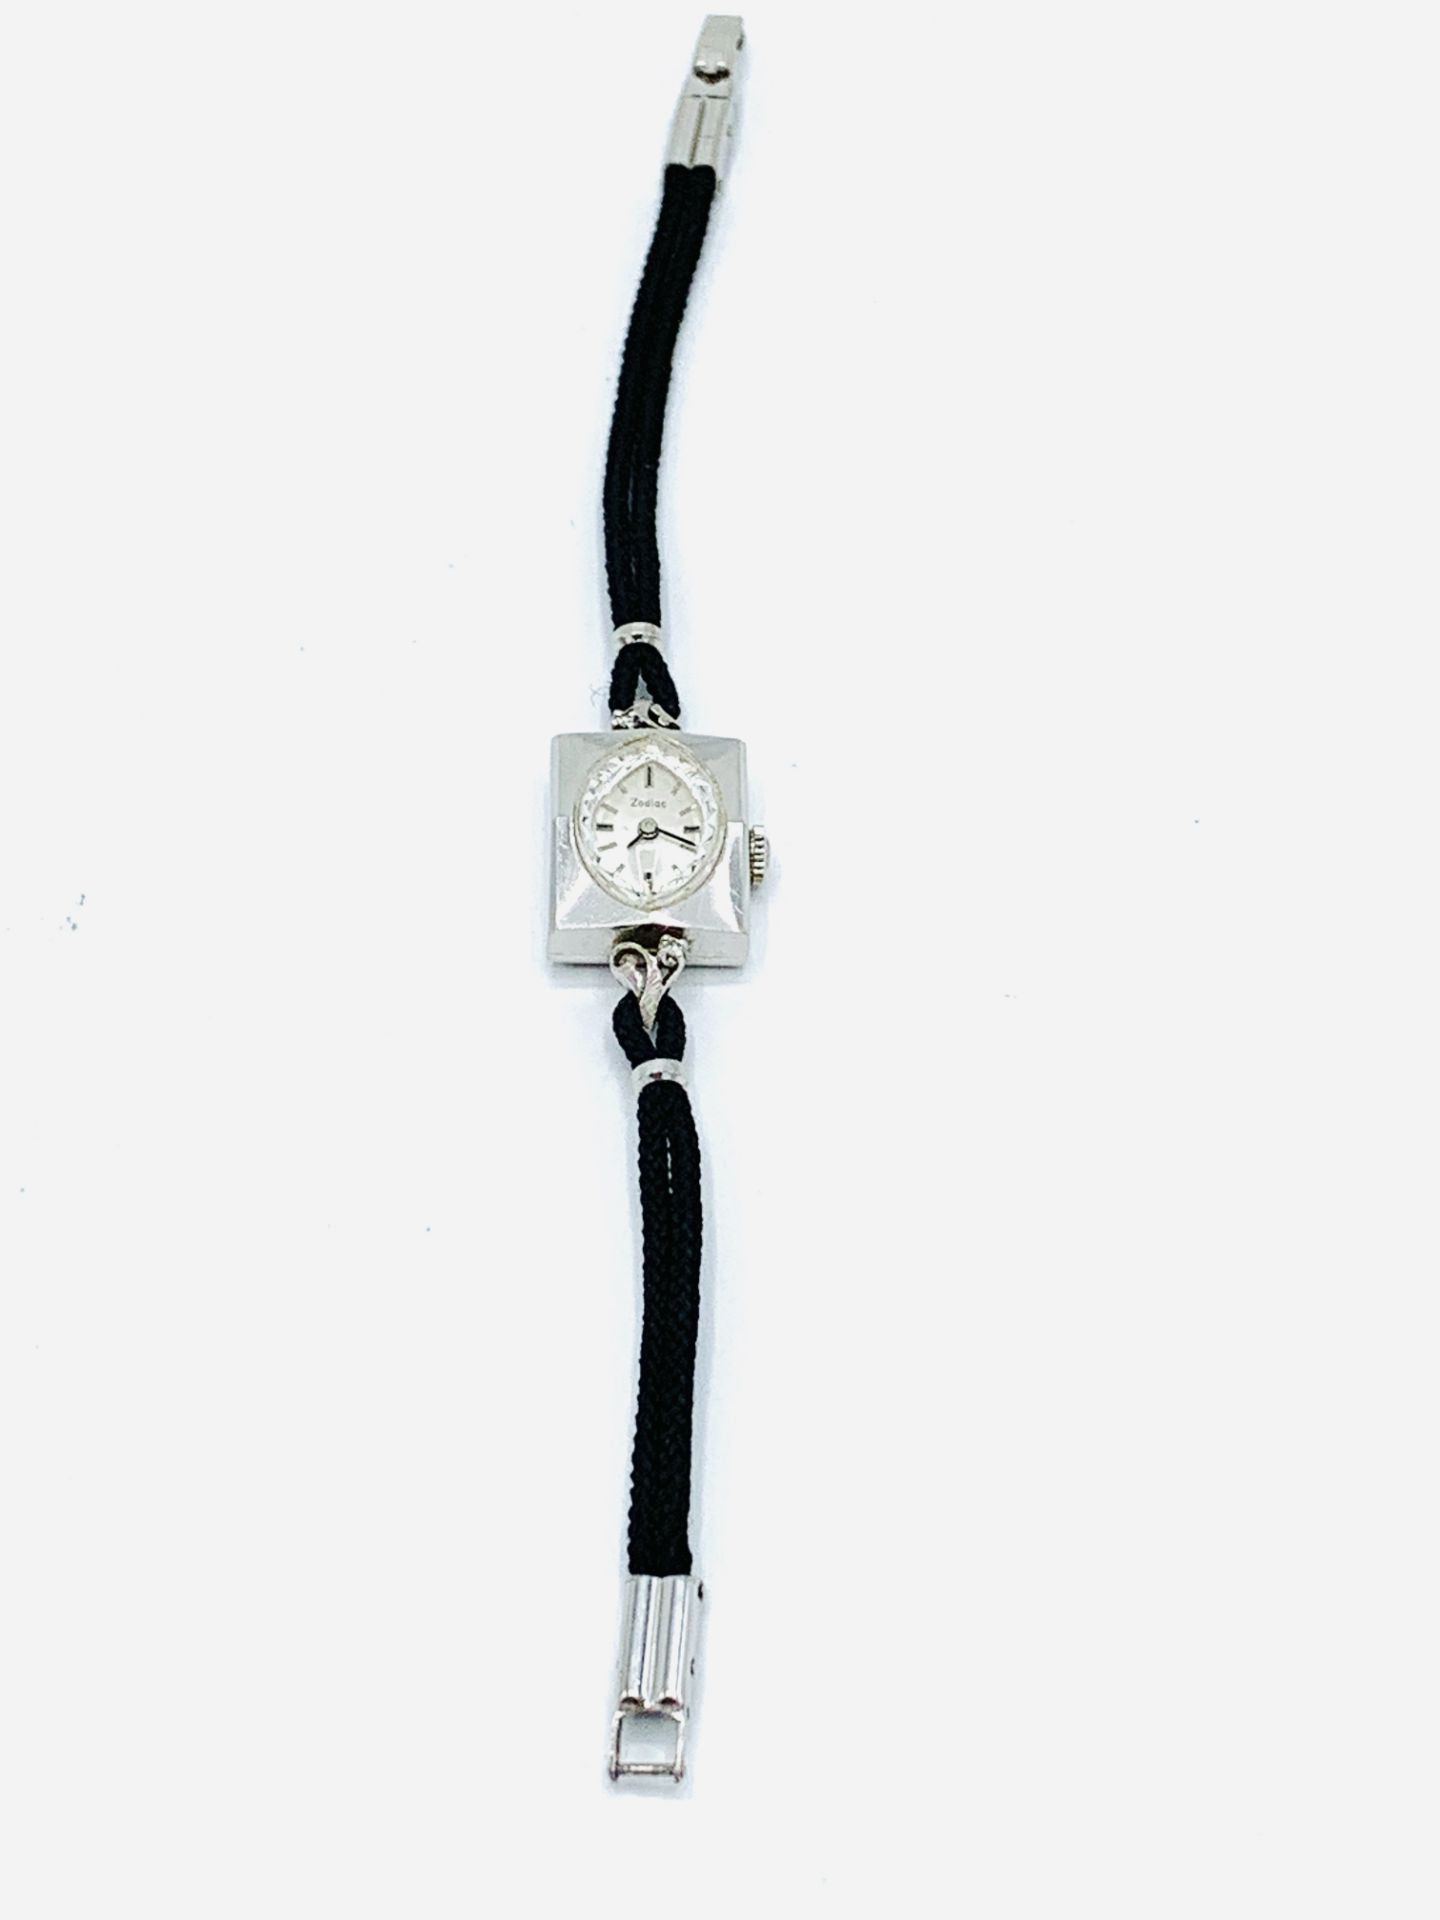 14k white gold cased Zodiac cocktail watch - Image 2 of 3